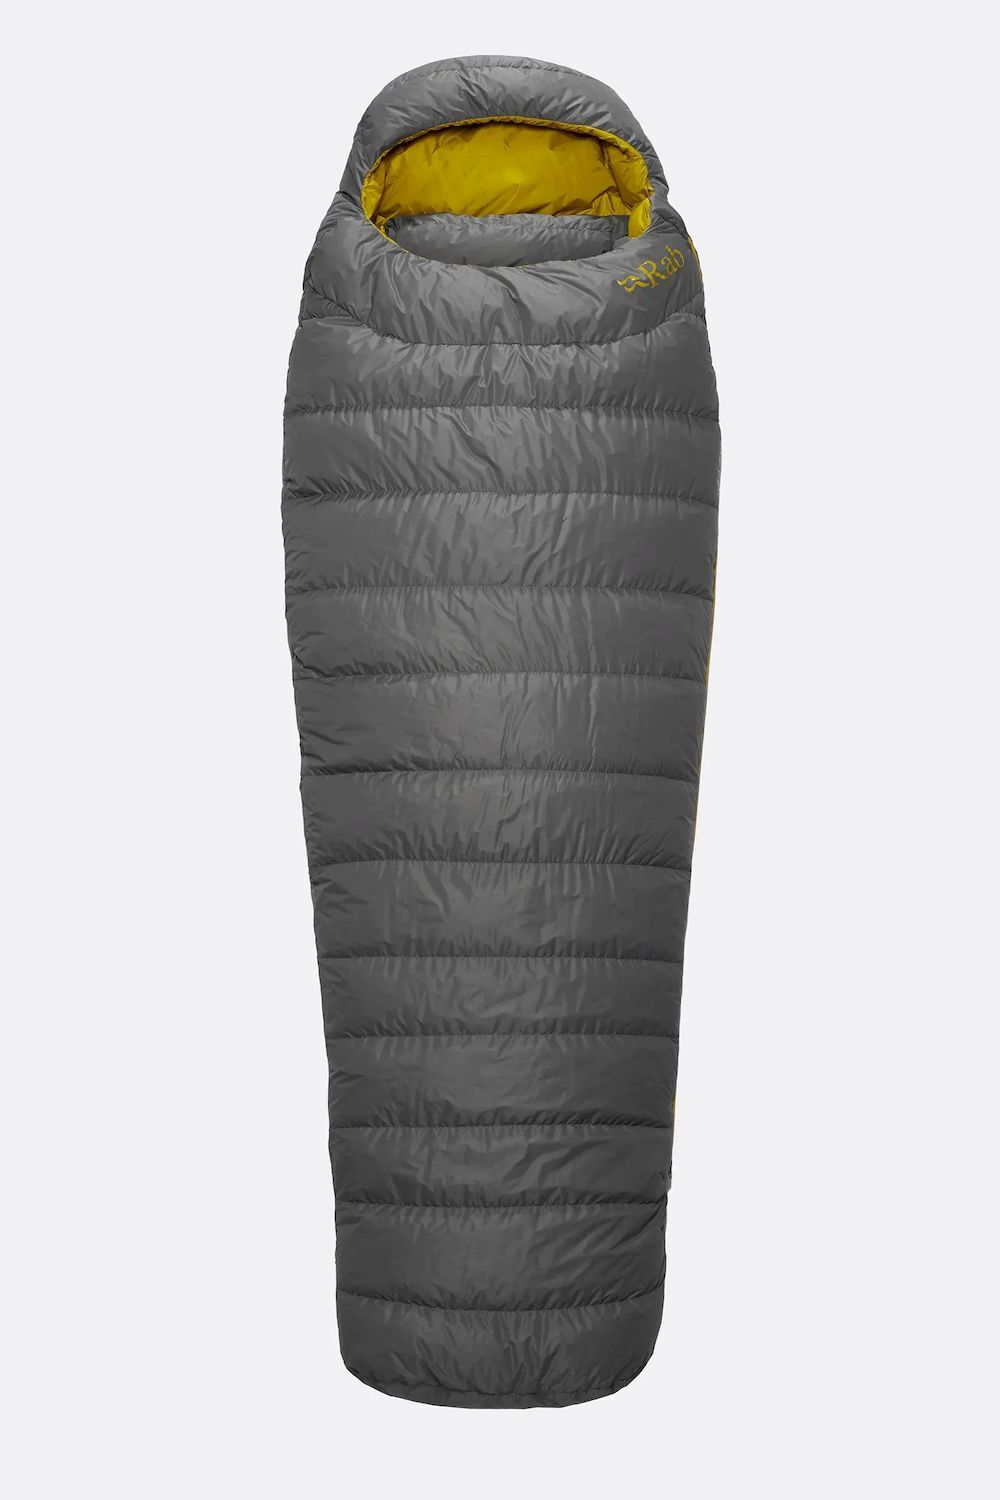 Rab Ascent Pro 400 - Schlafsack - 0